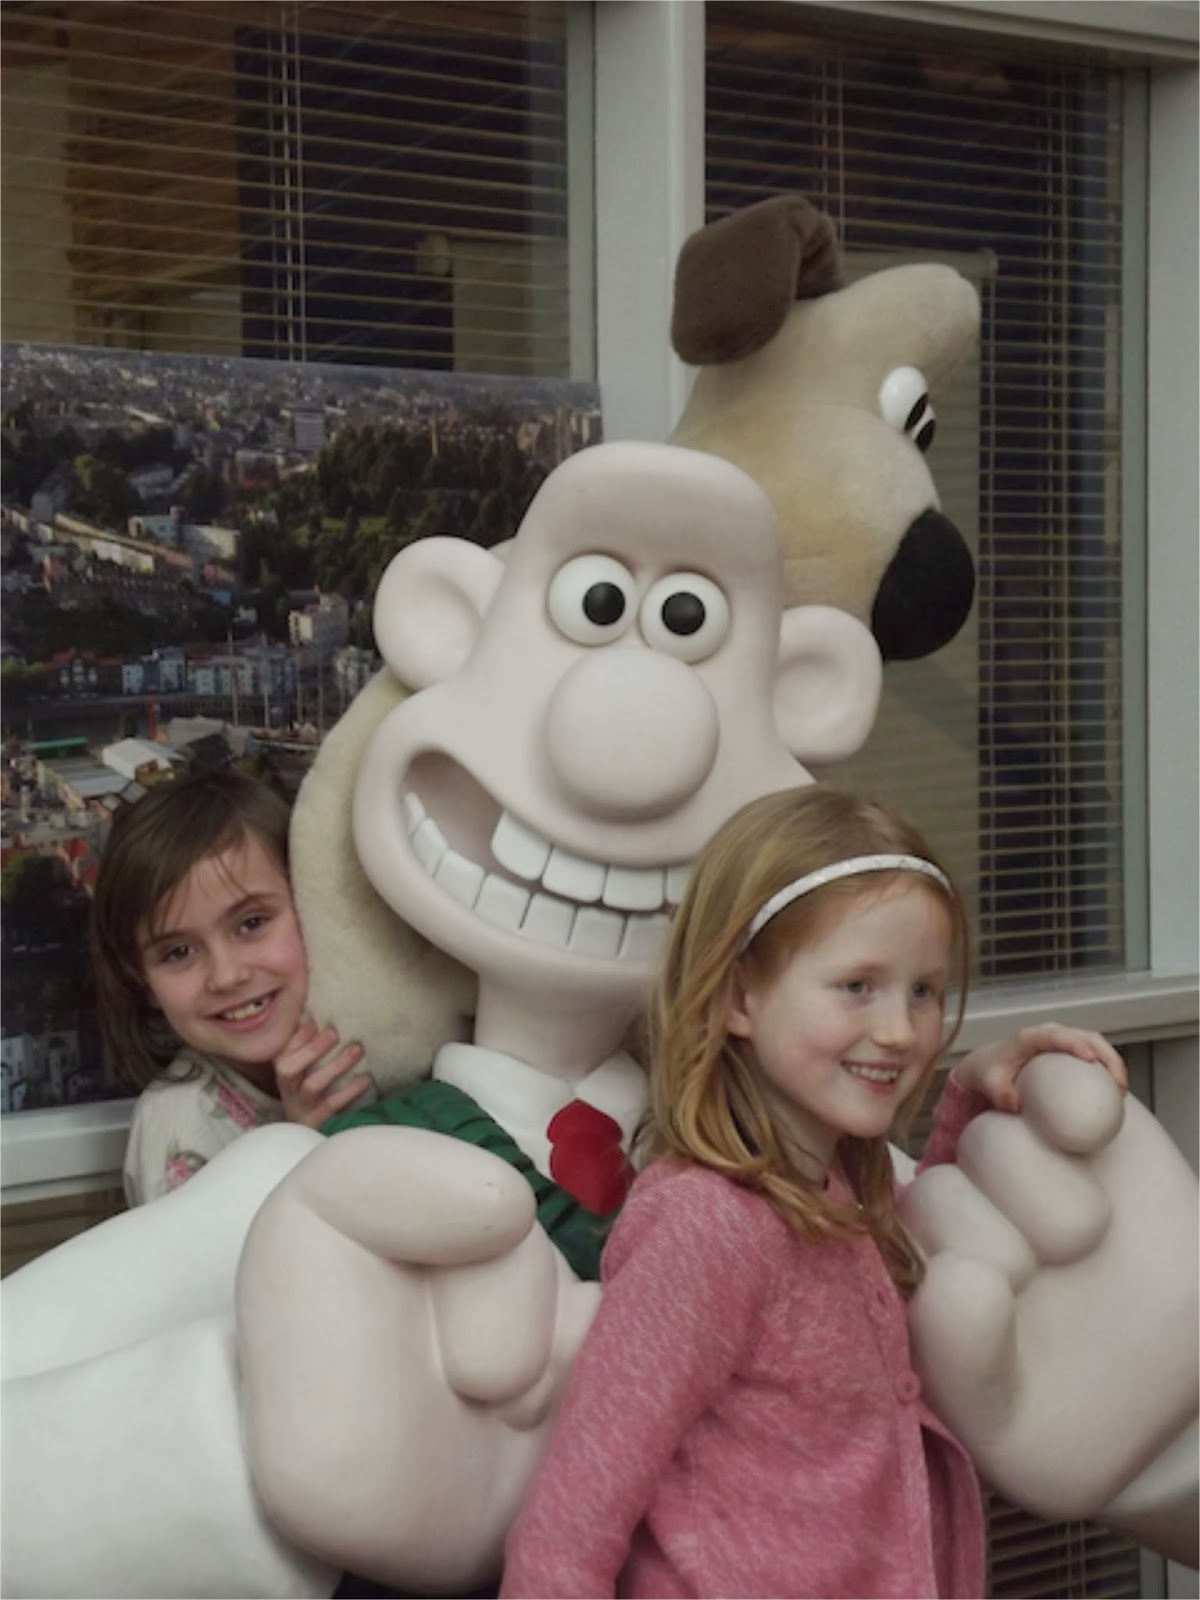 meeting Wallace and Grommit